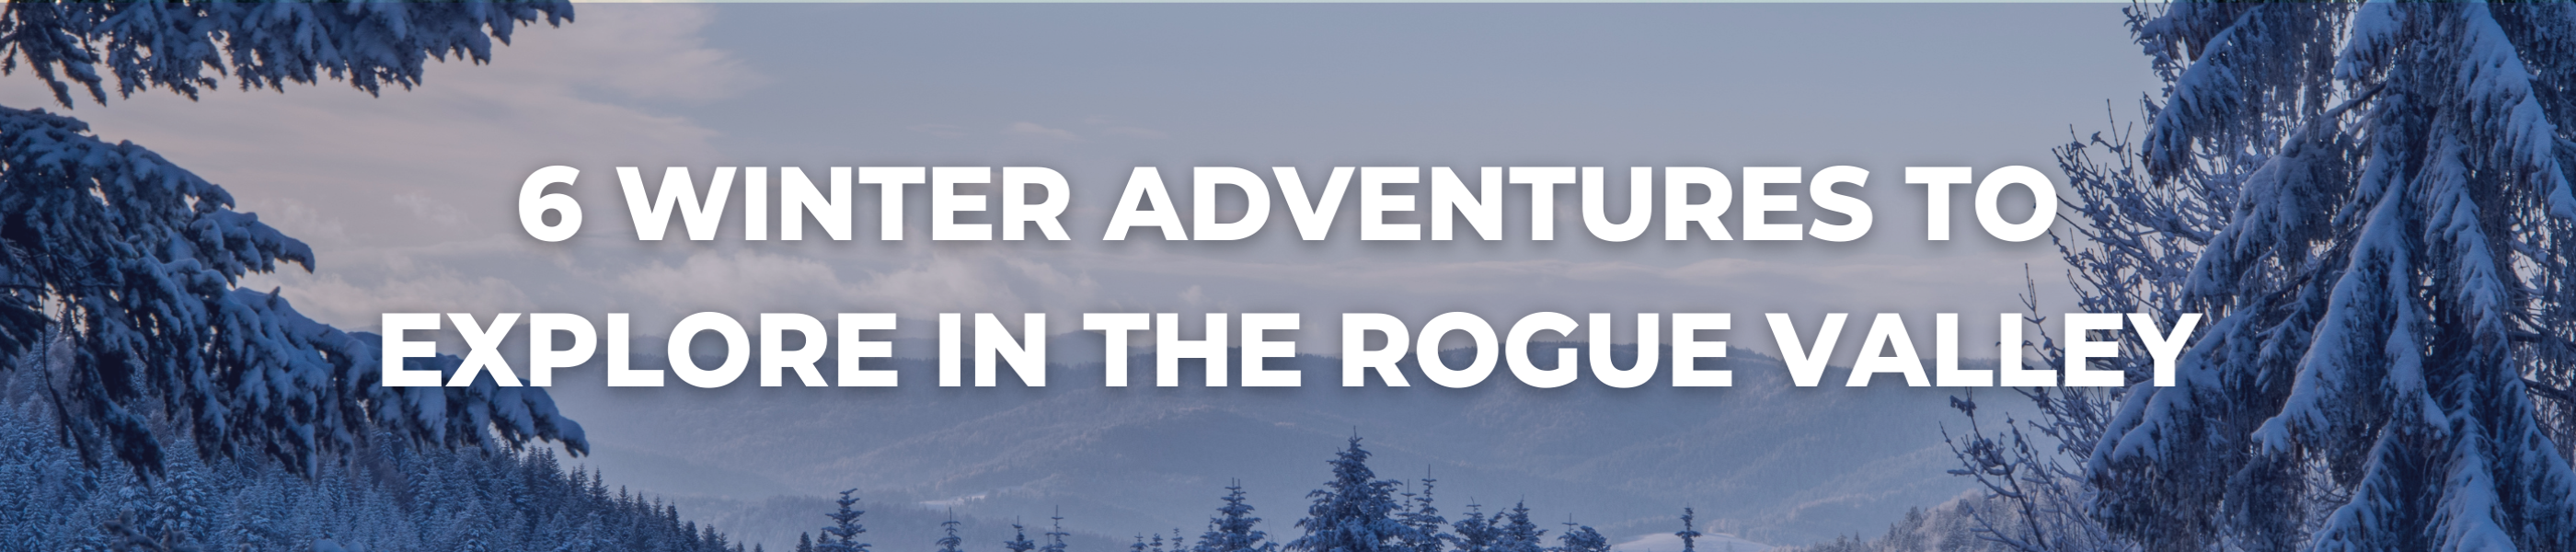 6 Winter adventures to explore in the rogue valley, discover, hiking, blog banner